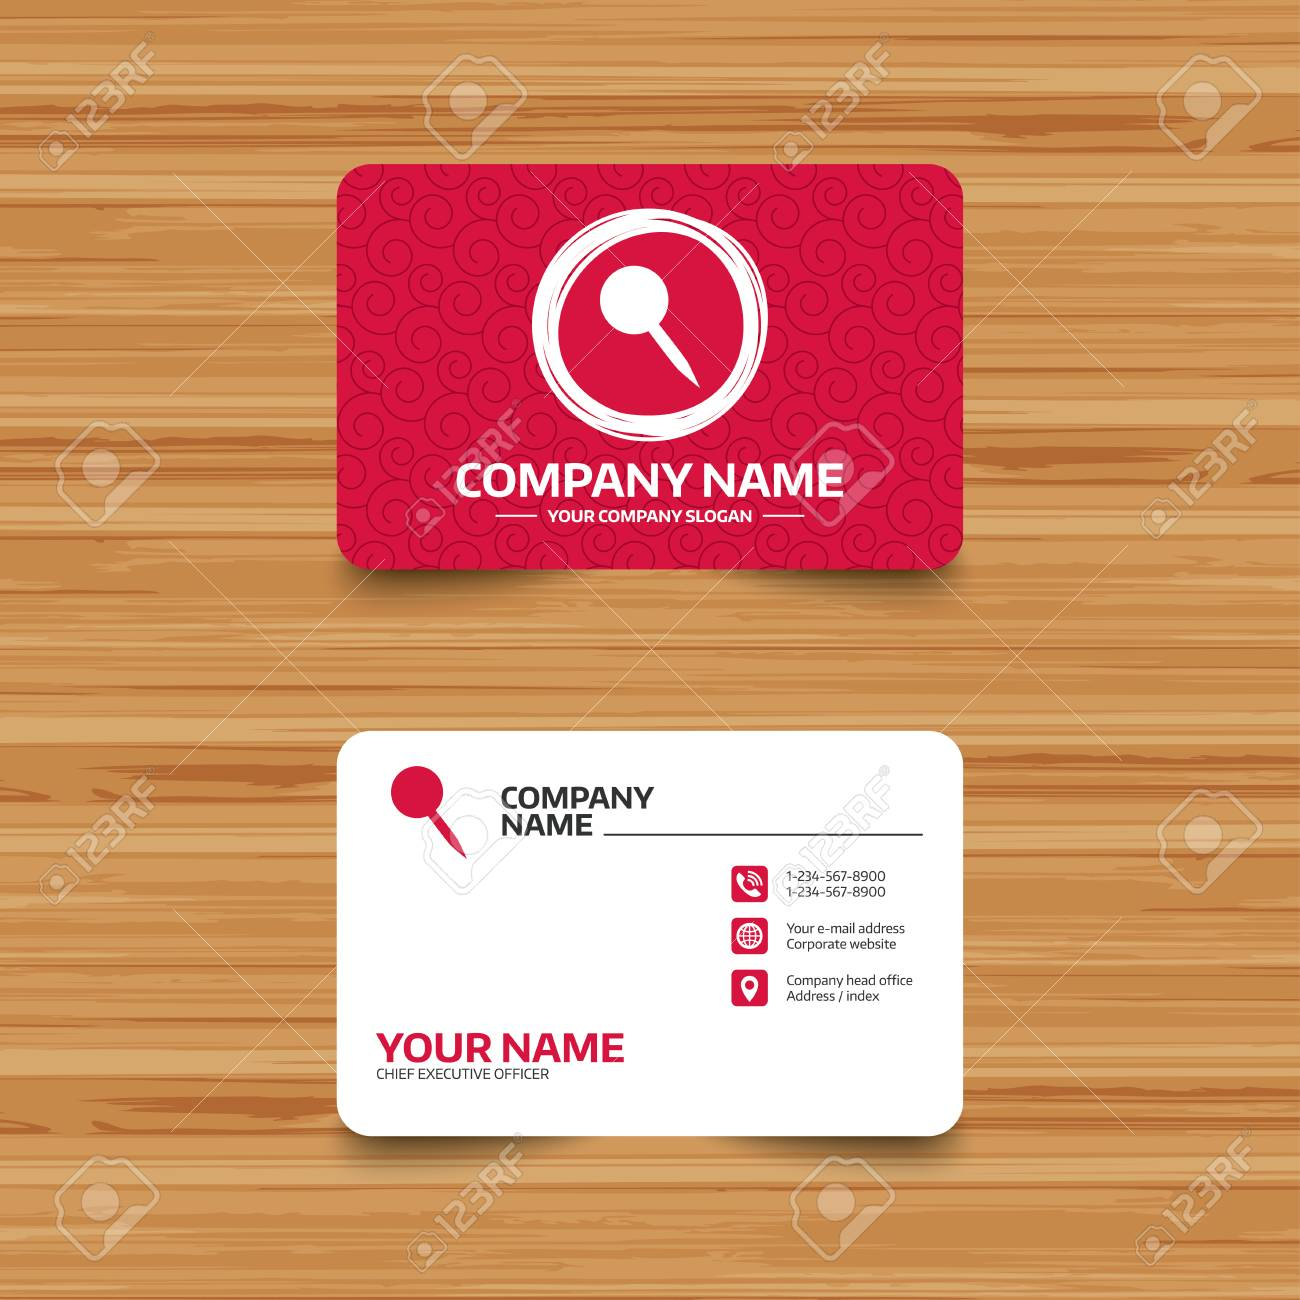 Business Card Template With Texture. Pushpin Sign Icon. Pin Button In Push Card Template